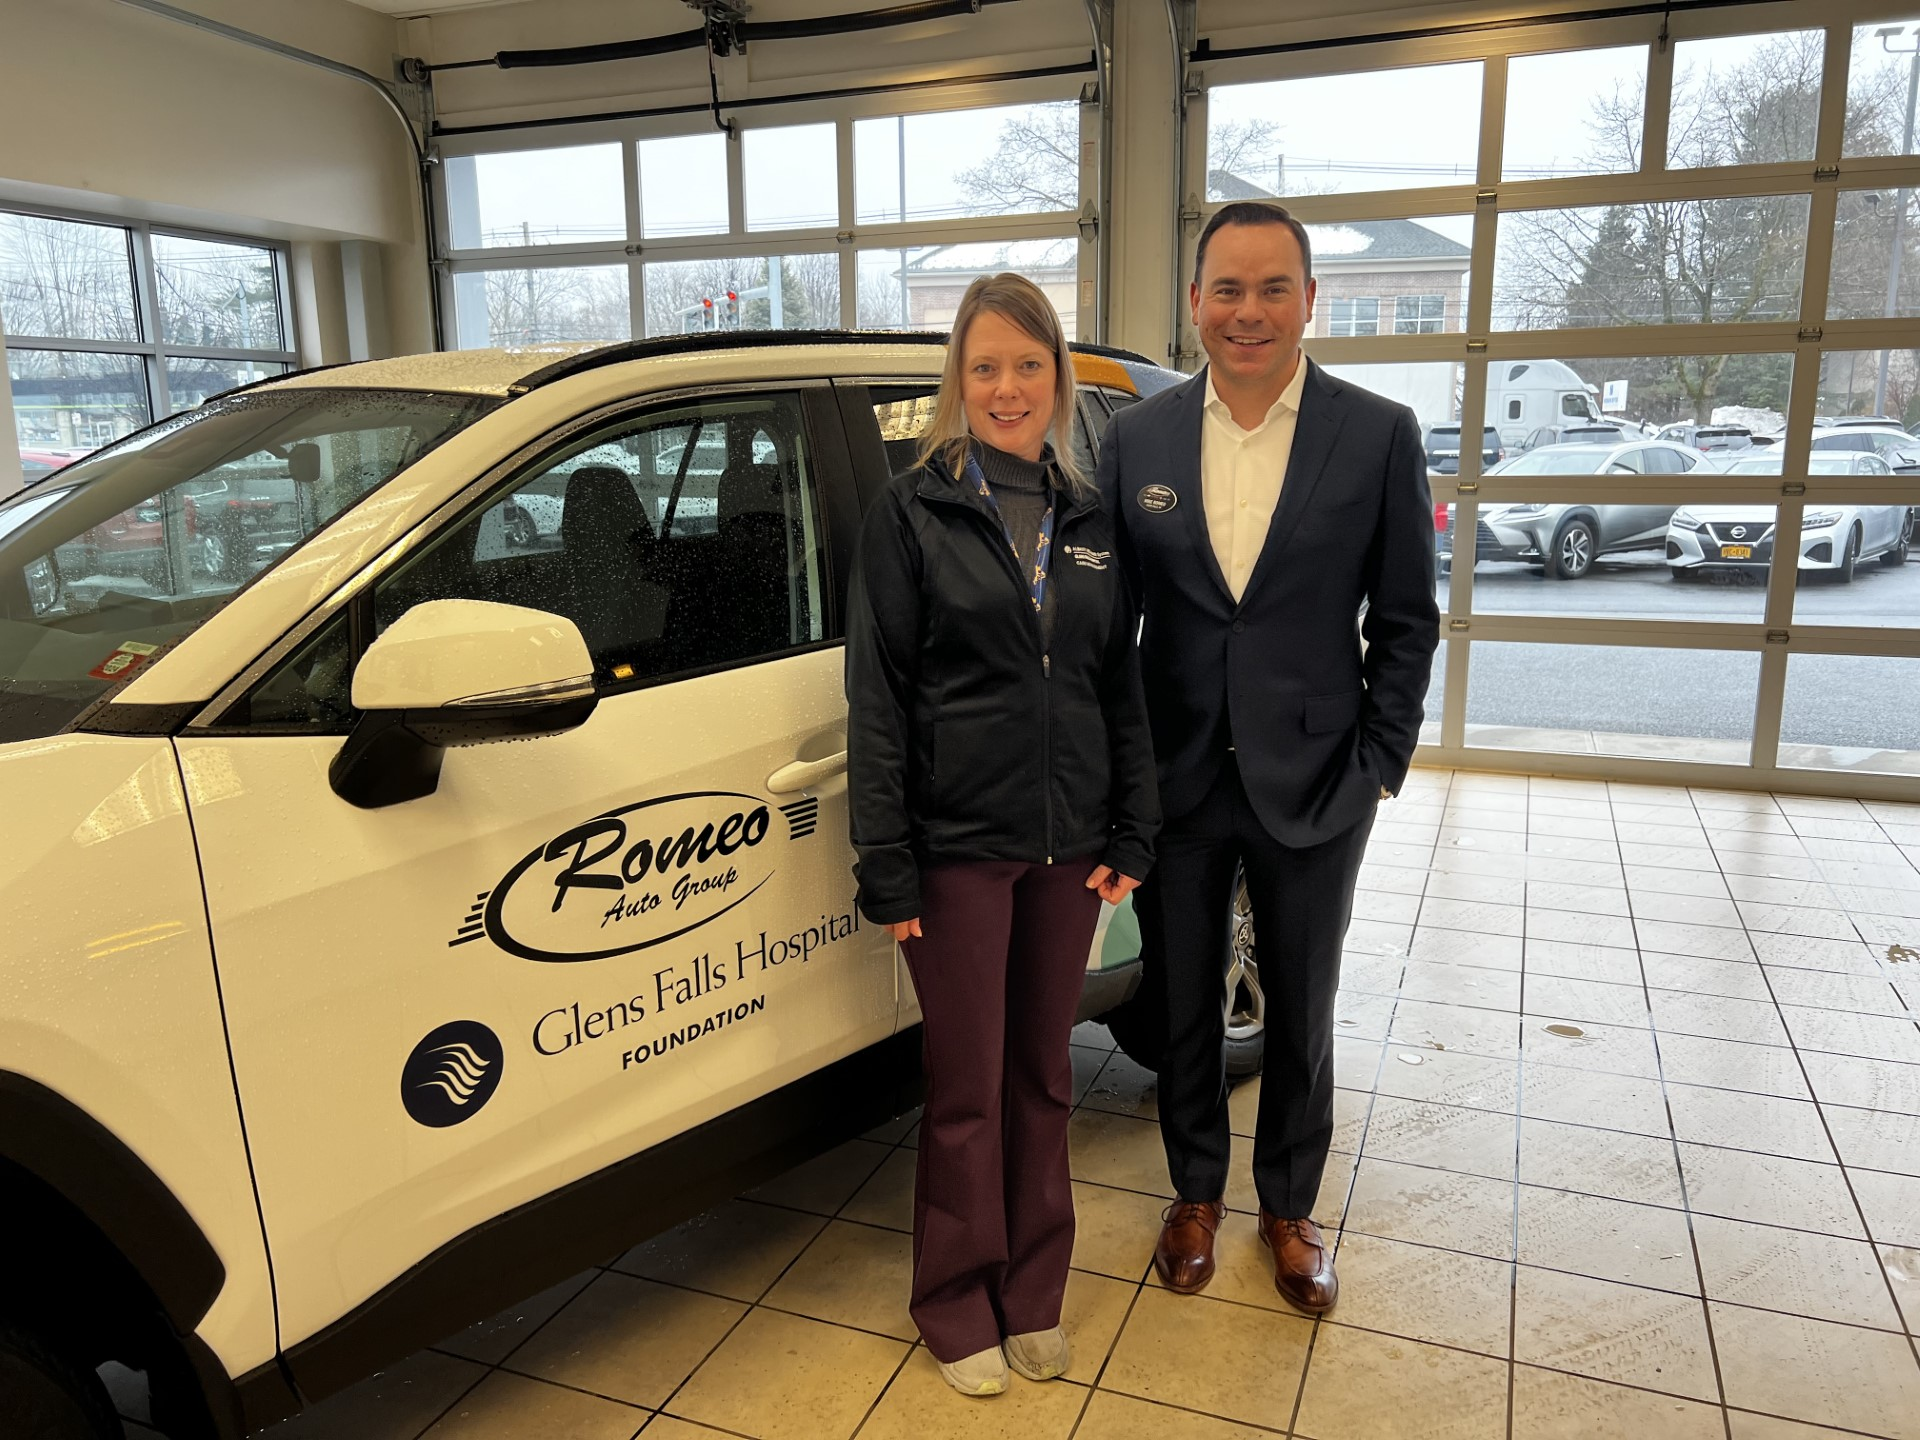 Jennifer H. from Wilton, NY. Pictured with Mike Romeo, owner of Romeo Toyota of Glens Falls.